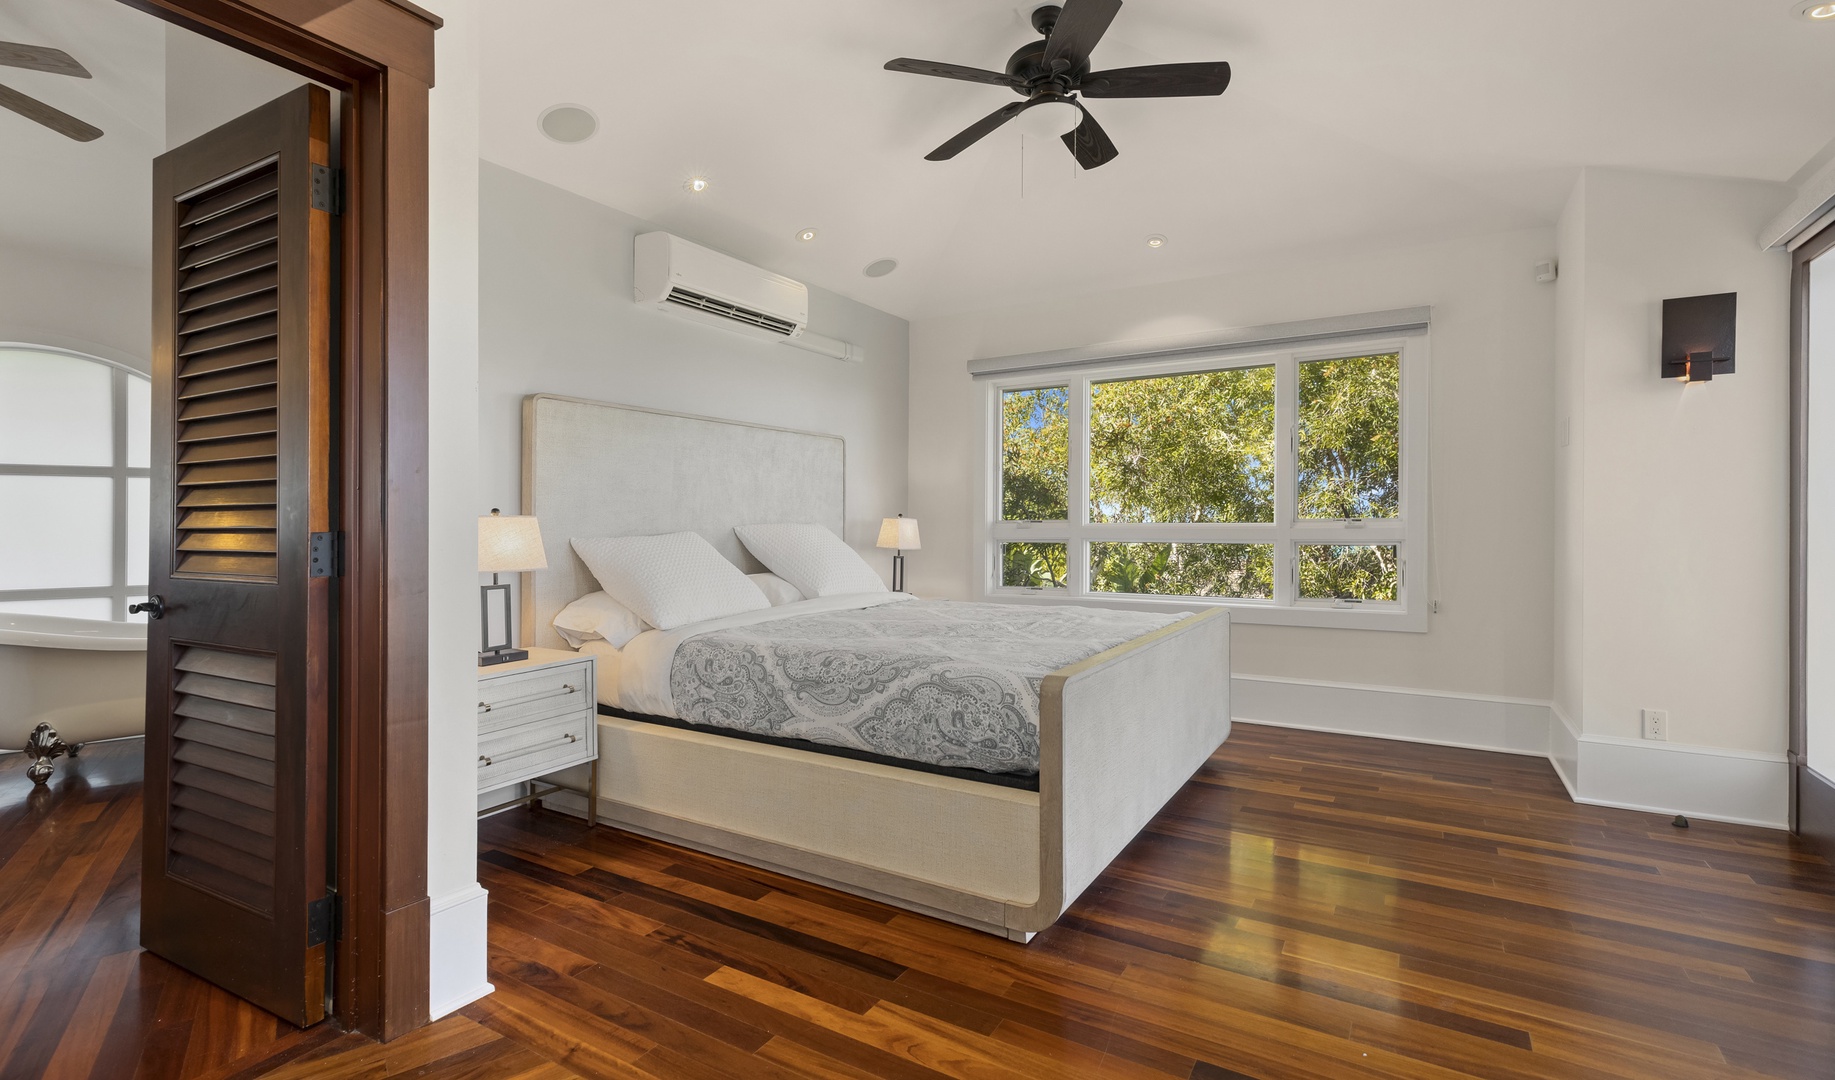 Kailua Vacation Rentals, Lanikai Villa - The Primary Bedroom is furnished with a king bed, split A/C, ceiling fan, and ensuite bathroom